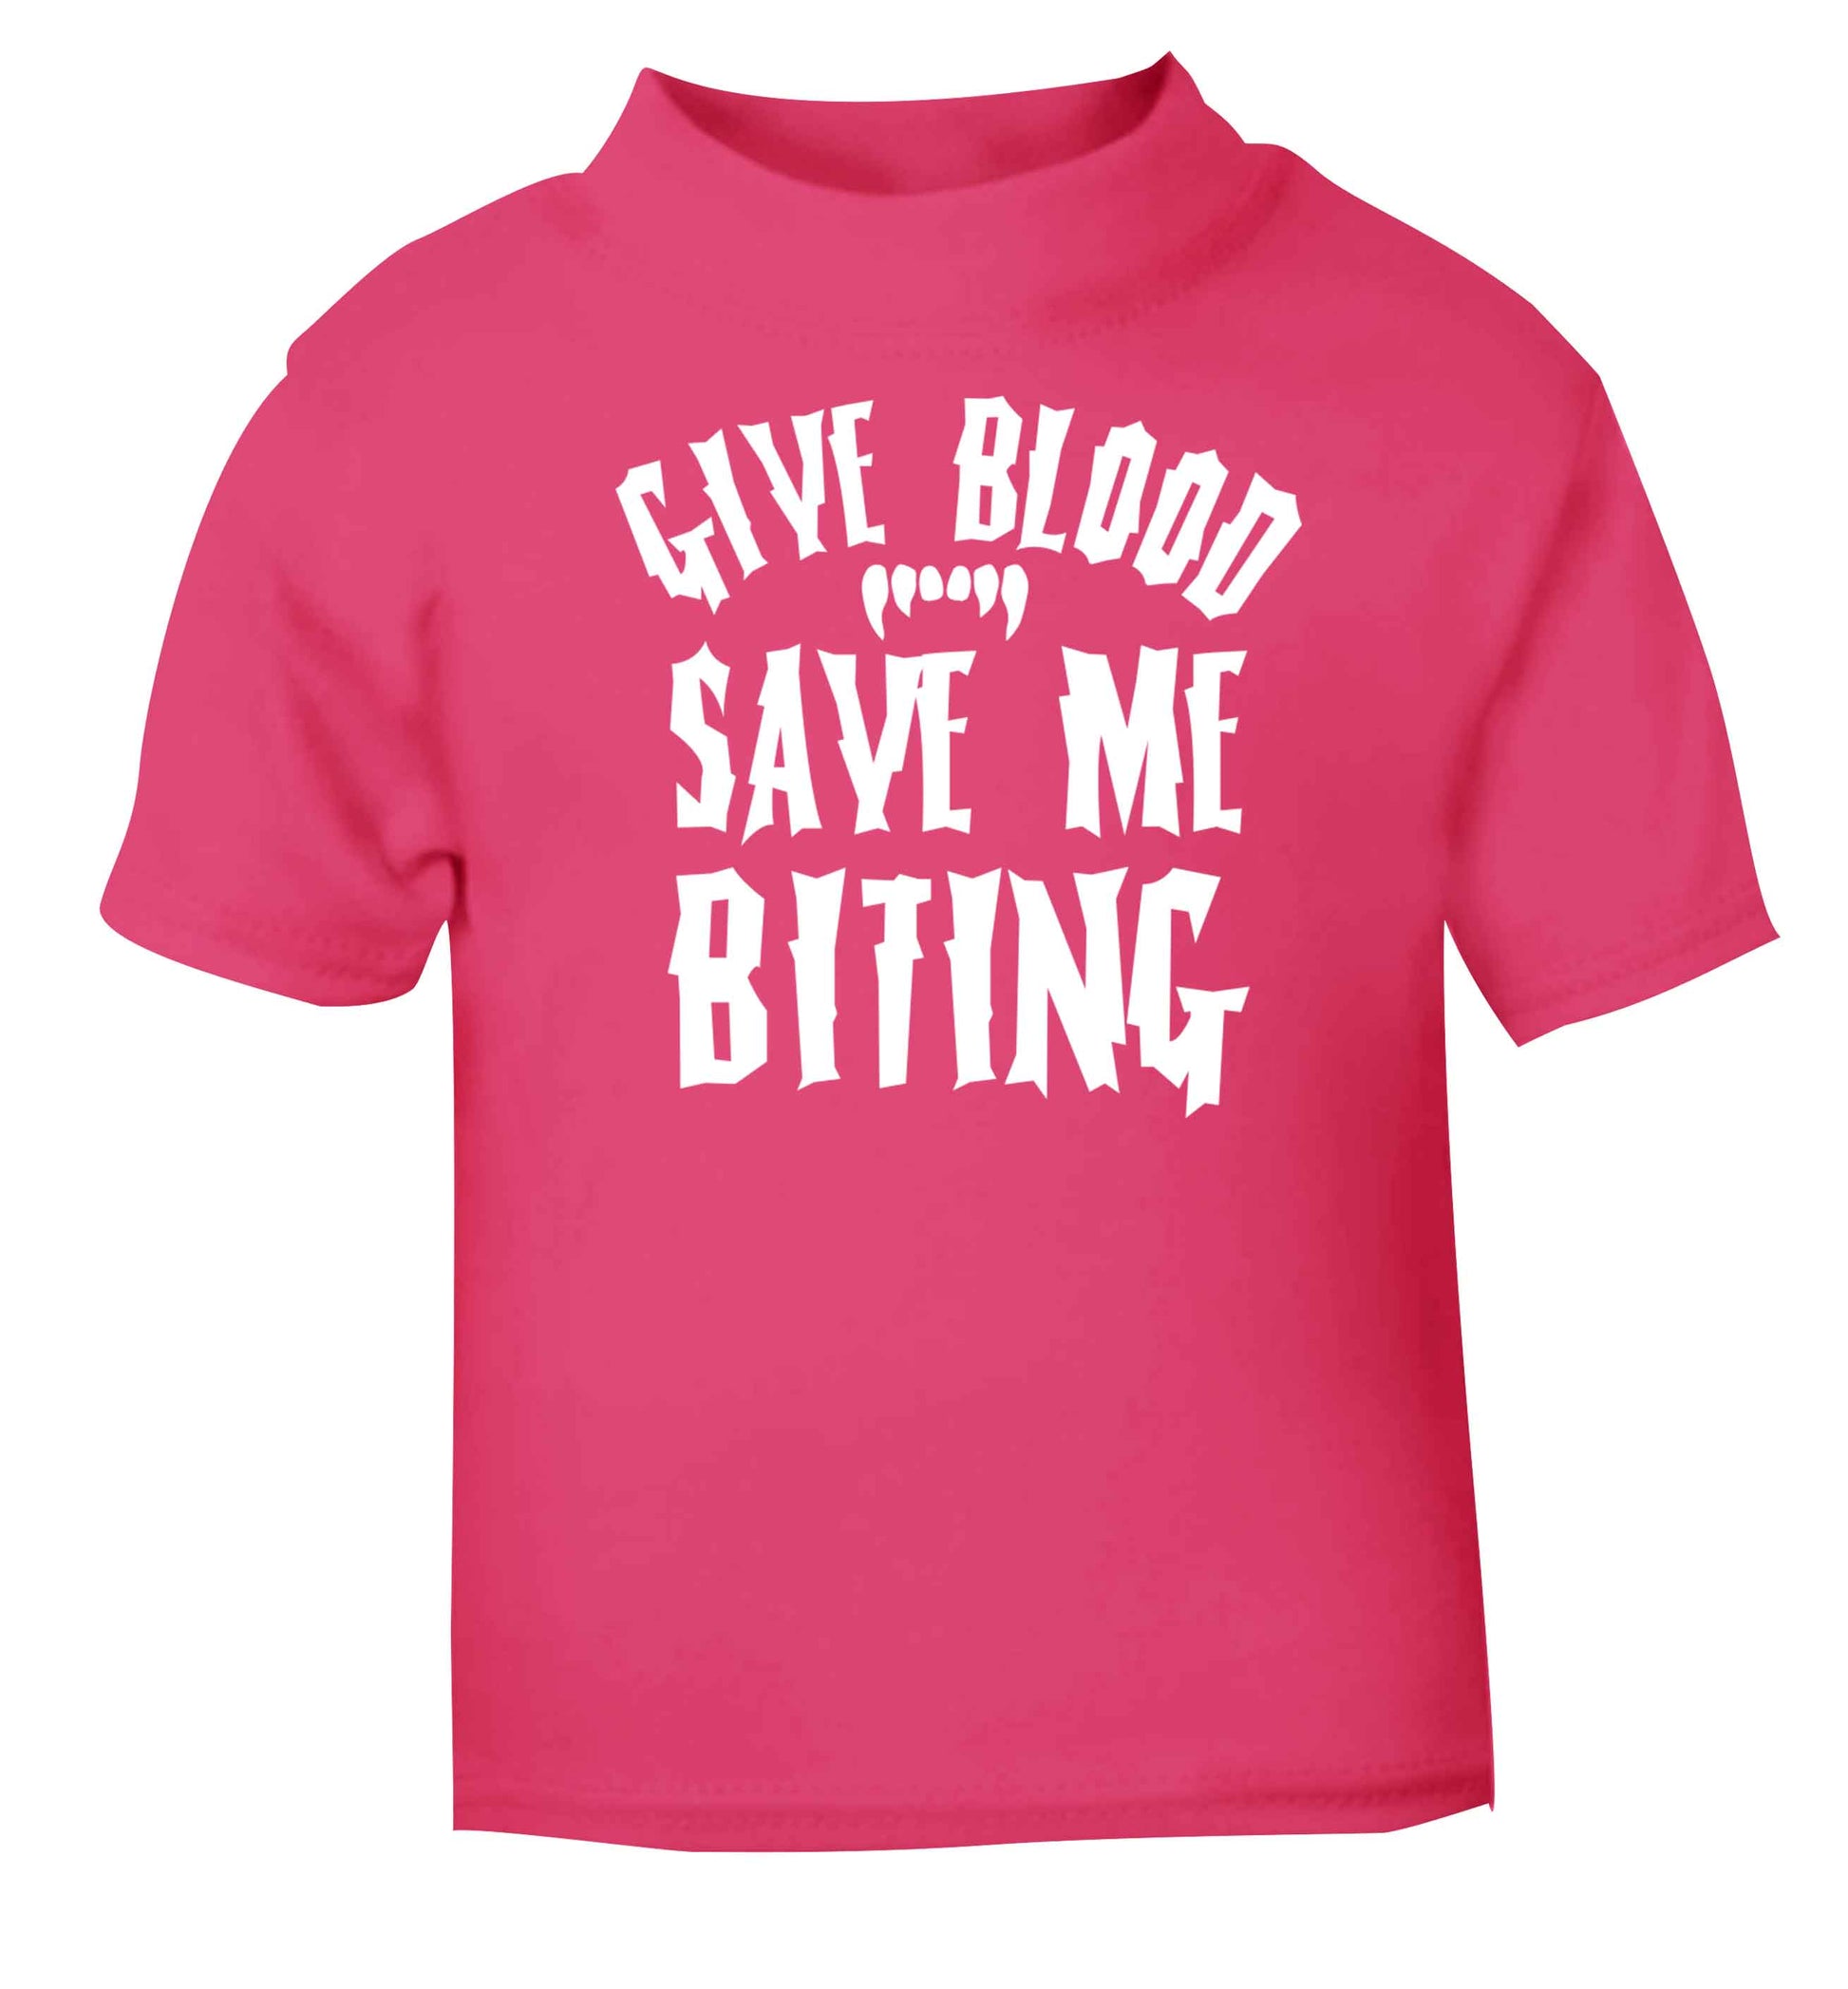 Give blood save me biting pink baby toddler Tshirt 2 Years